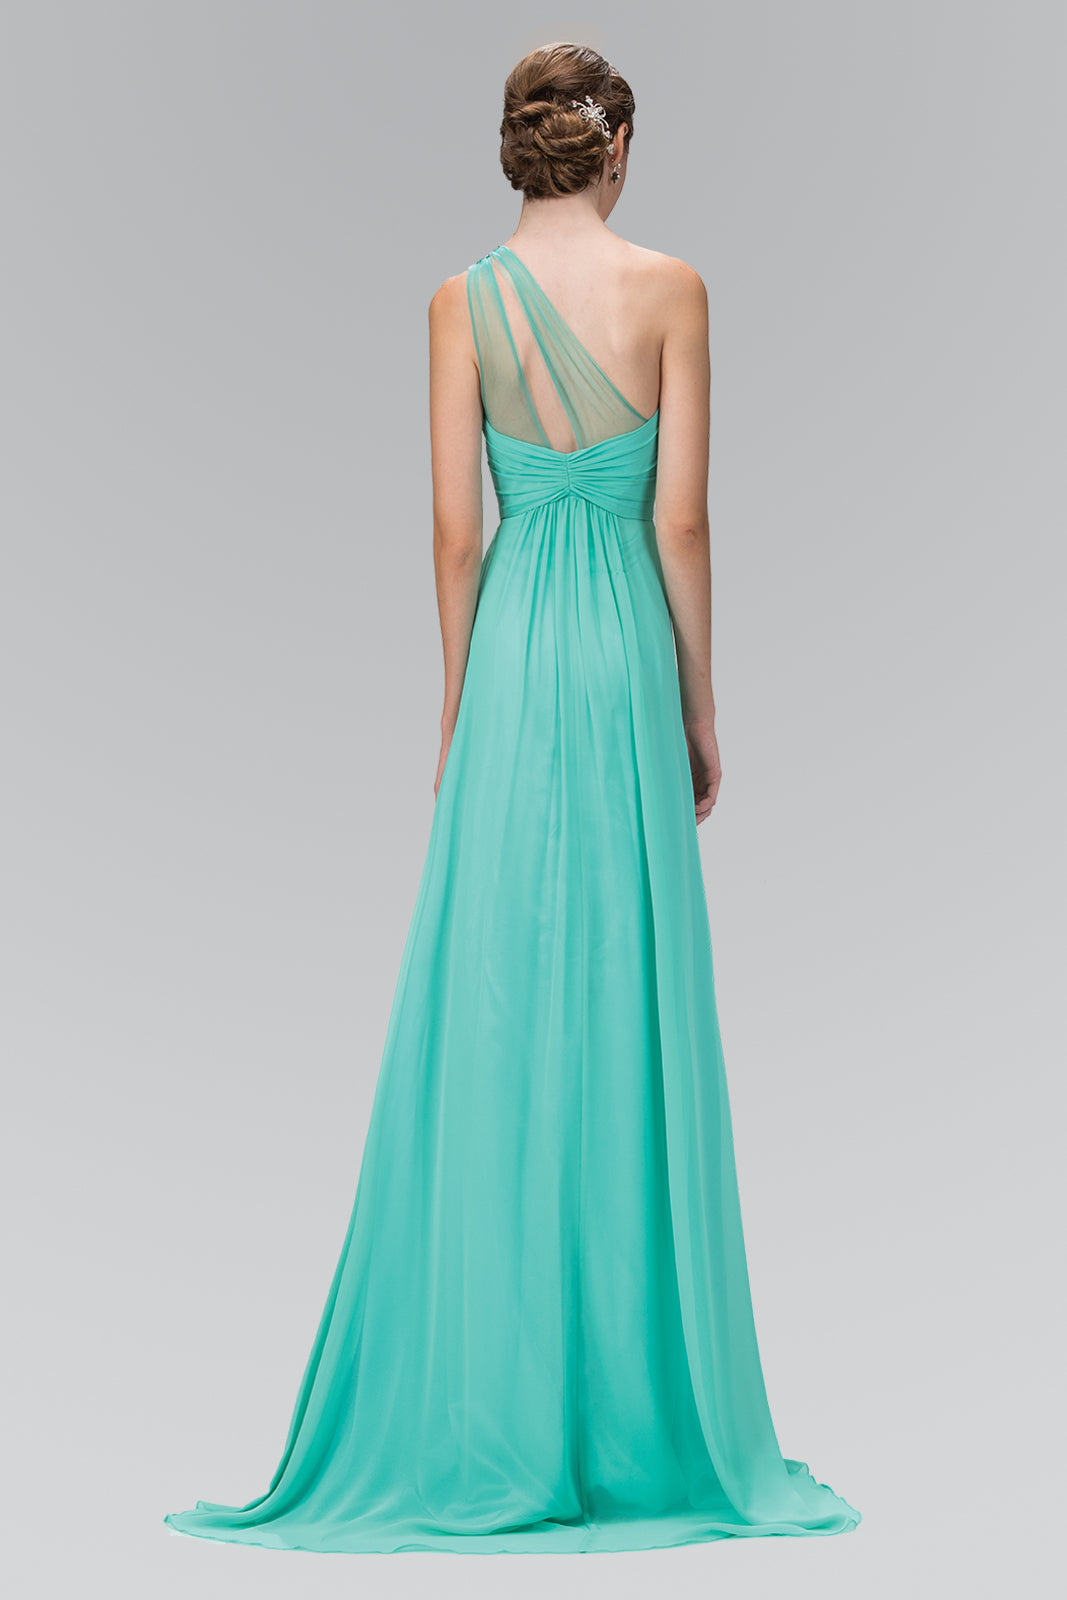 One Shoulder Chiffon Long Dress with Jewel Embellished Bodice and Ruched Waistline GLGL1138 Elsy Style PROM